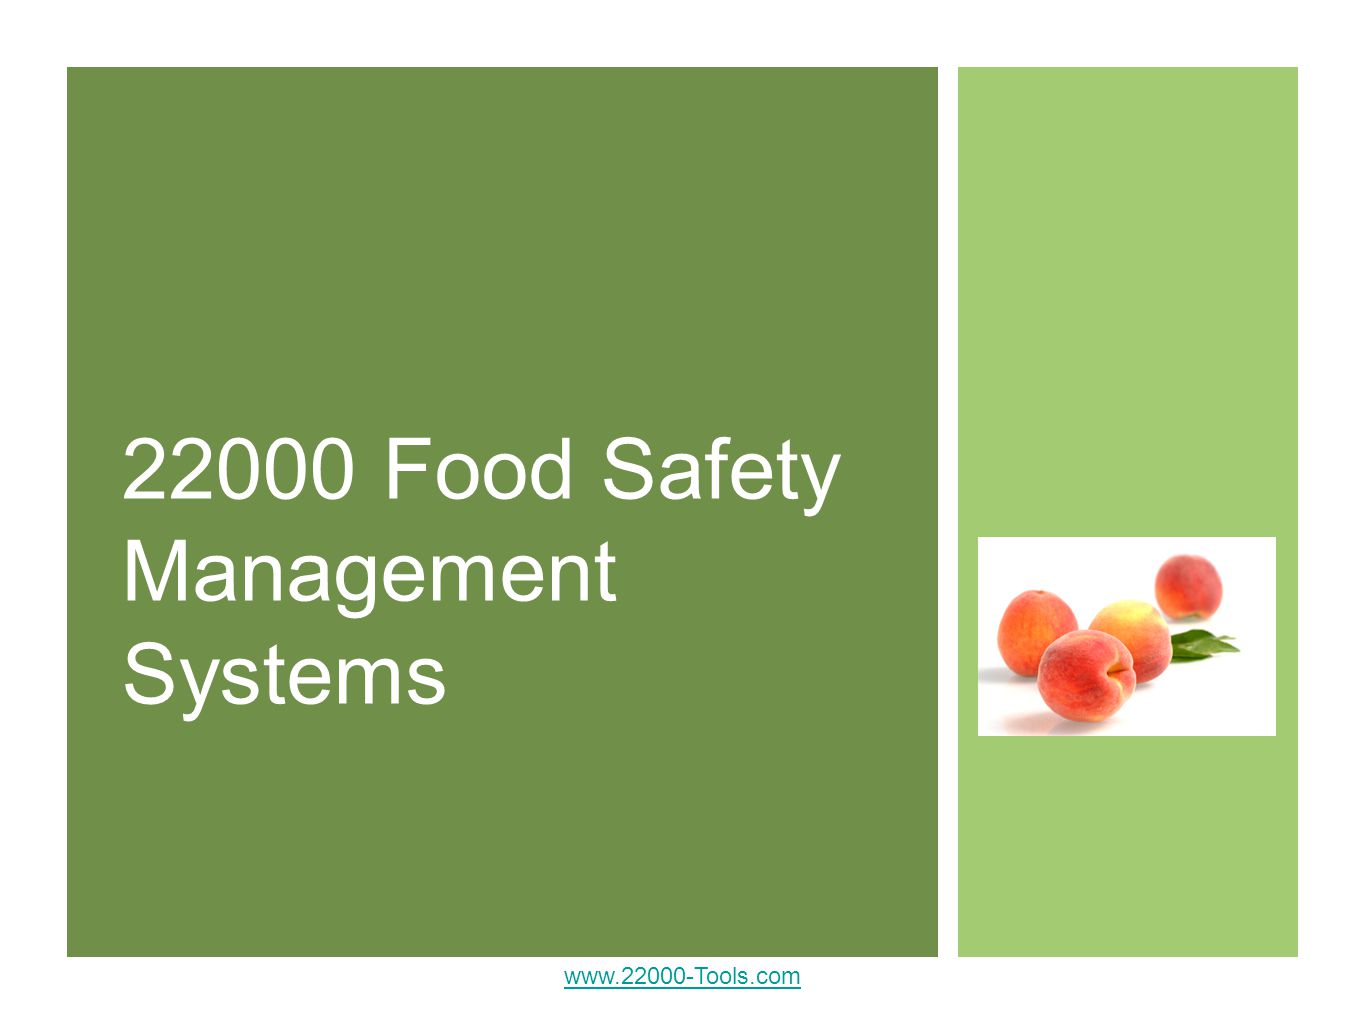 22000 Food Safety Management Systems - ppt video online download